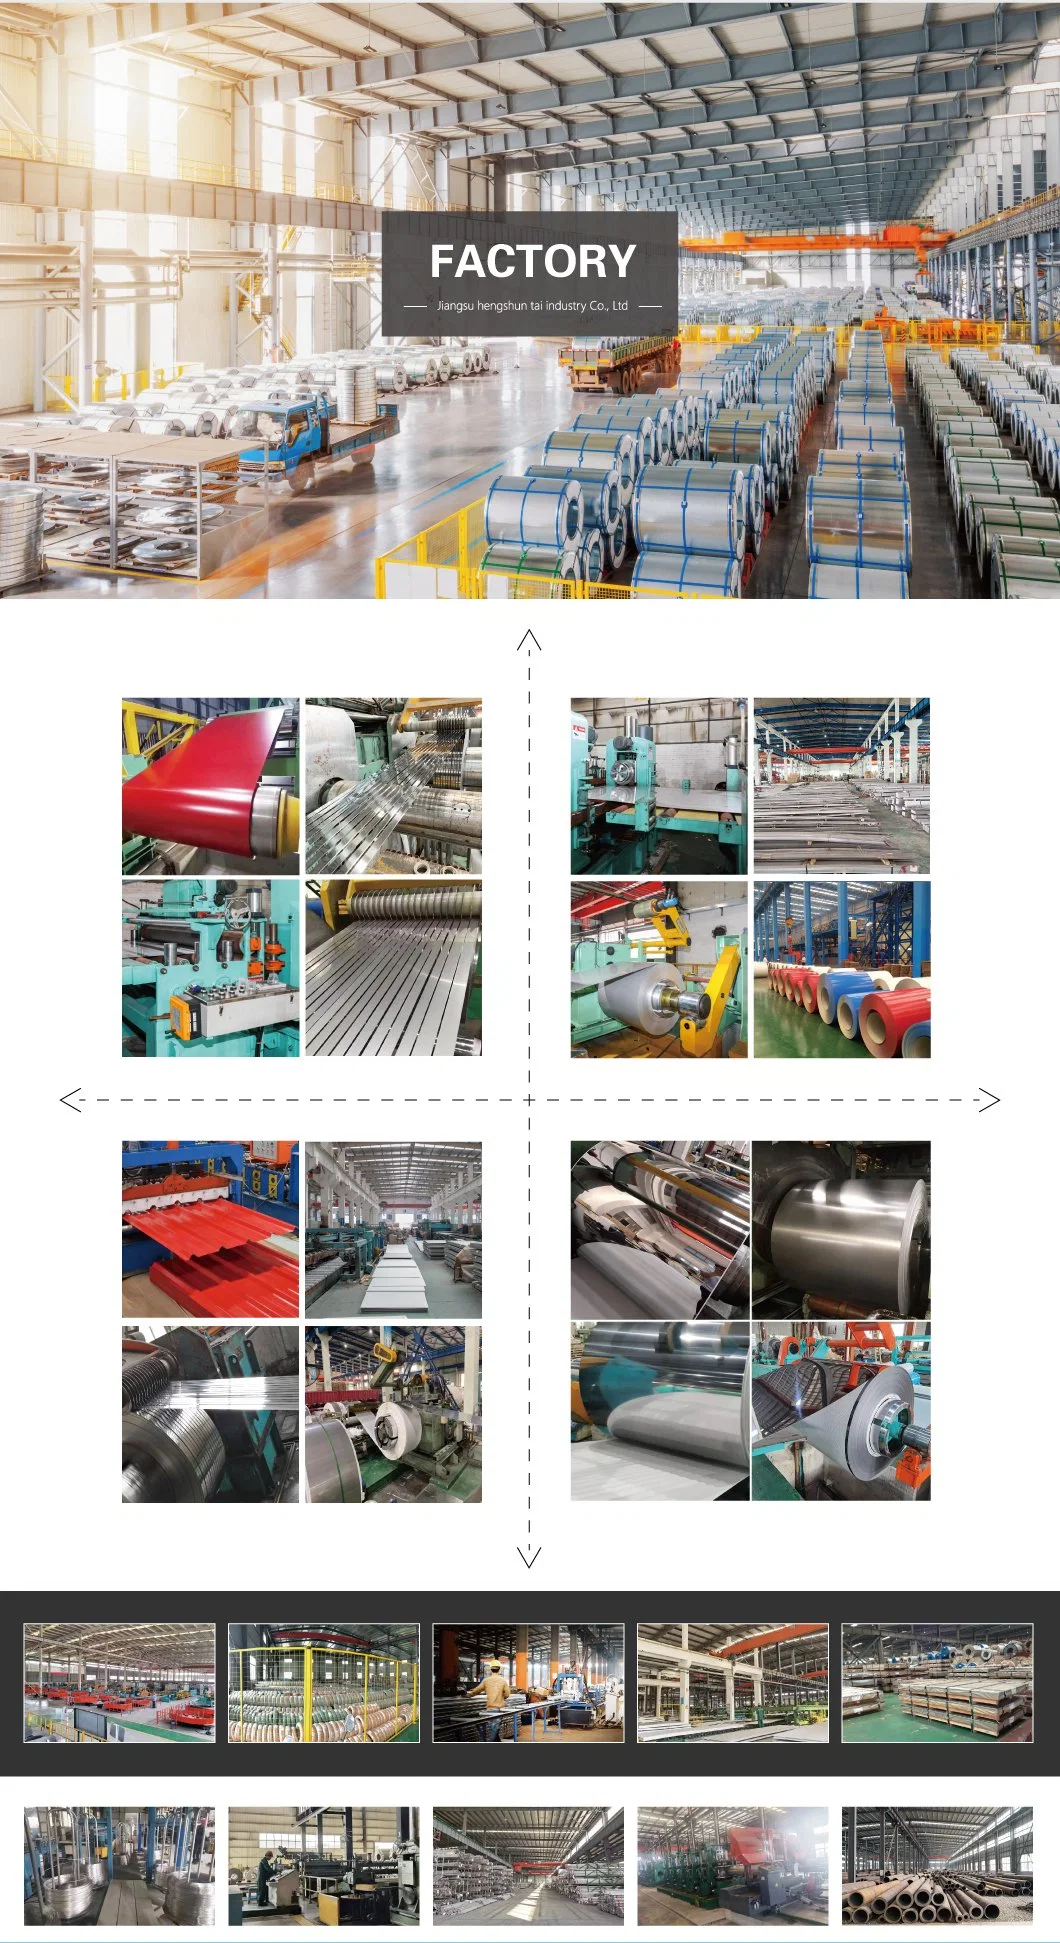 Annealed Stainless Steel Pipe 304 304L 316L Mirror Polished Surface Stainless Steel Pipe Sanitary Piping